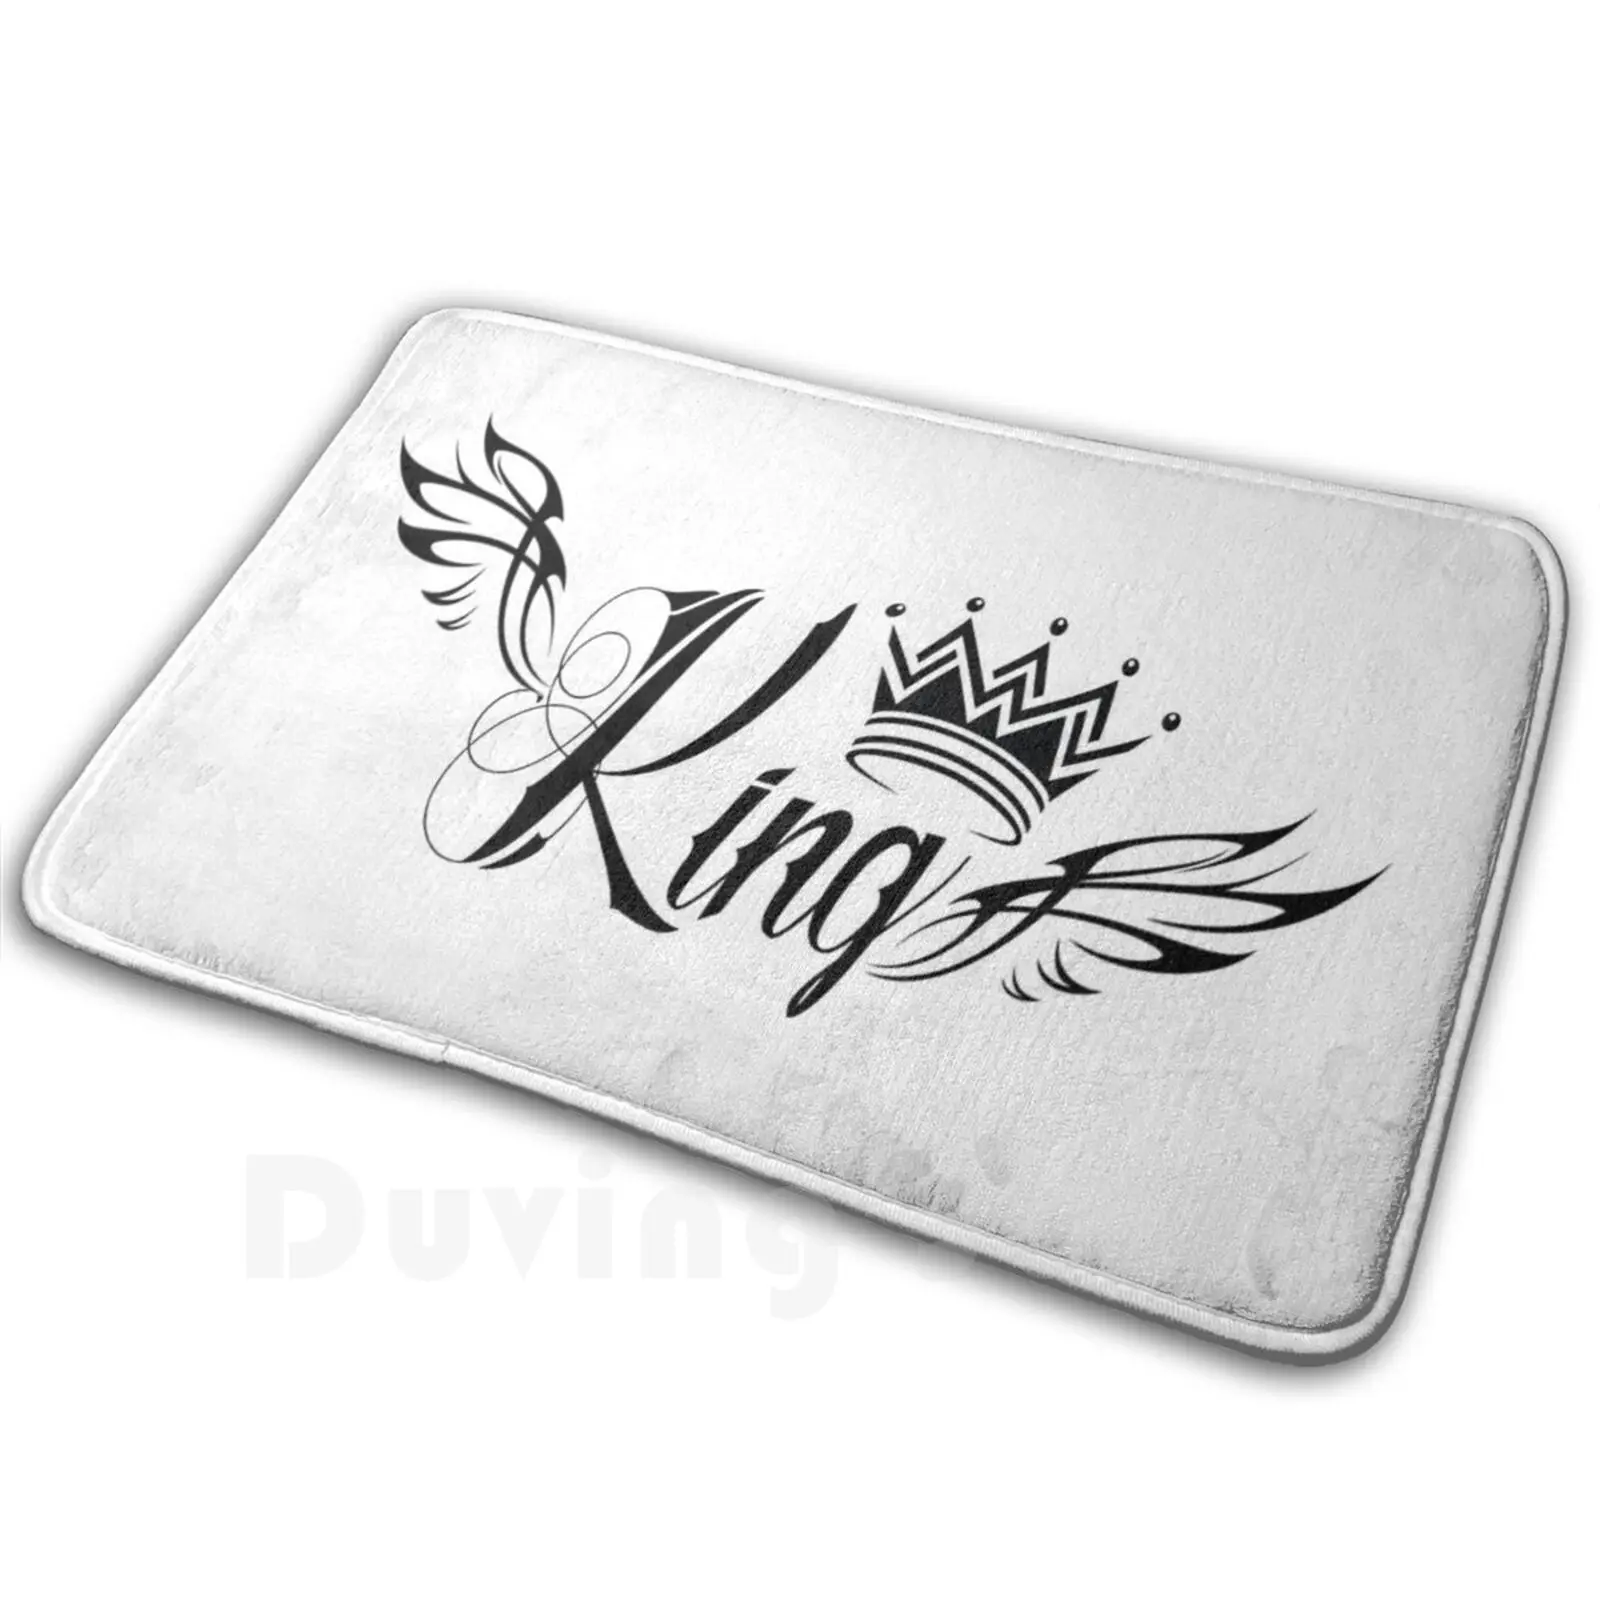 

King Baby-My King Carpet Mat Rug Cushion Soft What Is The Story My King You Are My Husband And My King My Baby My